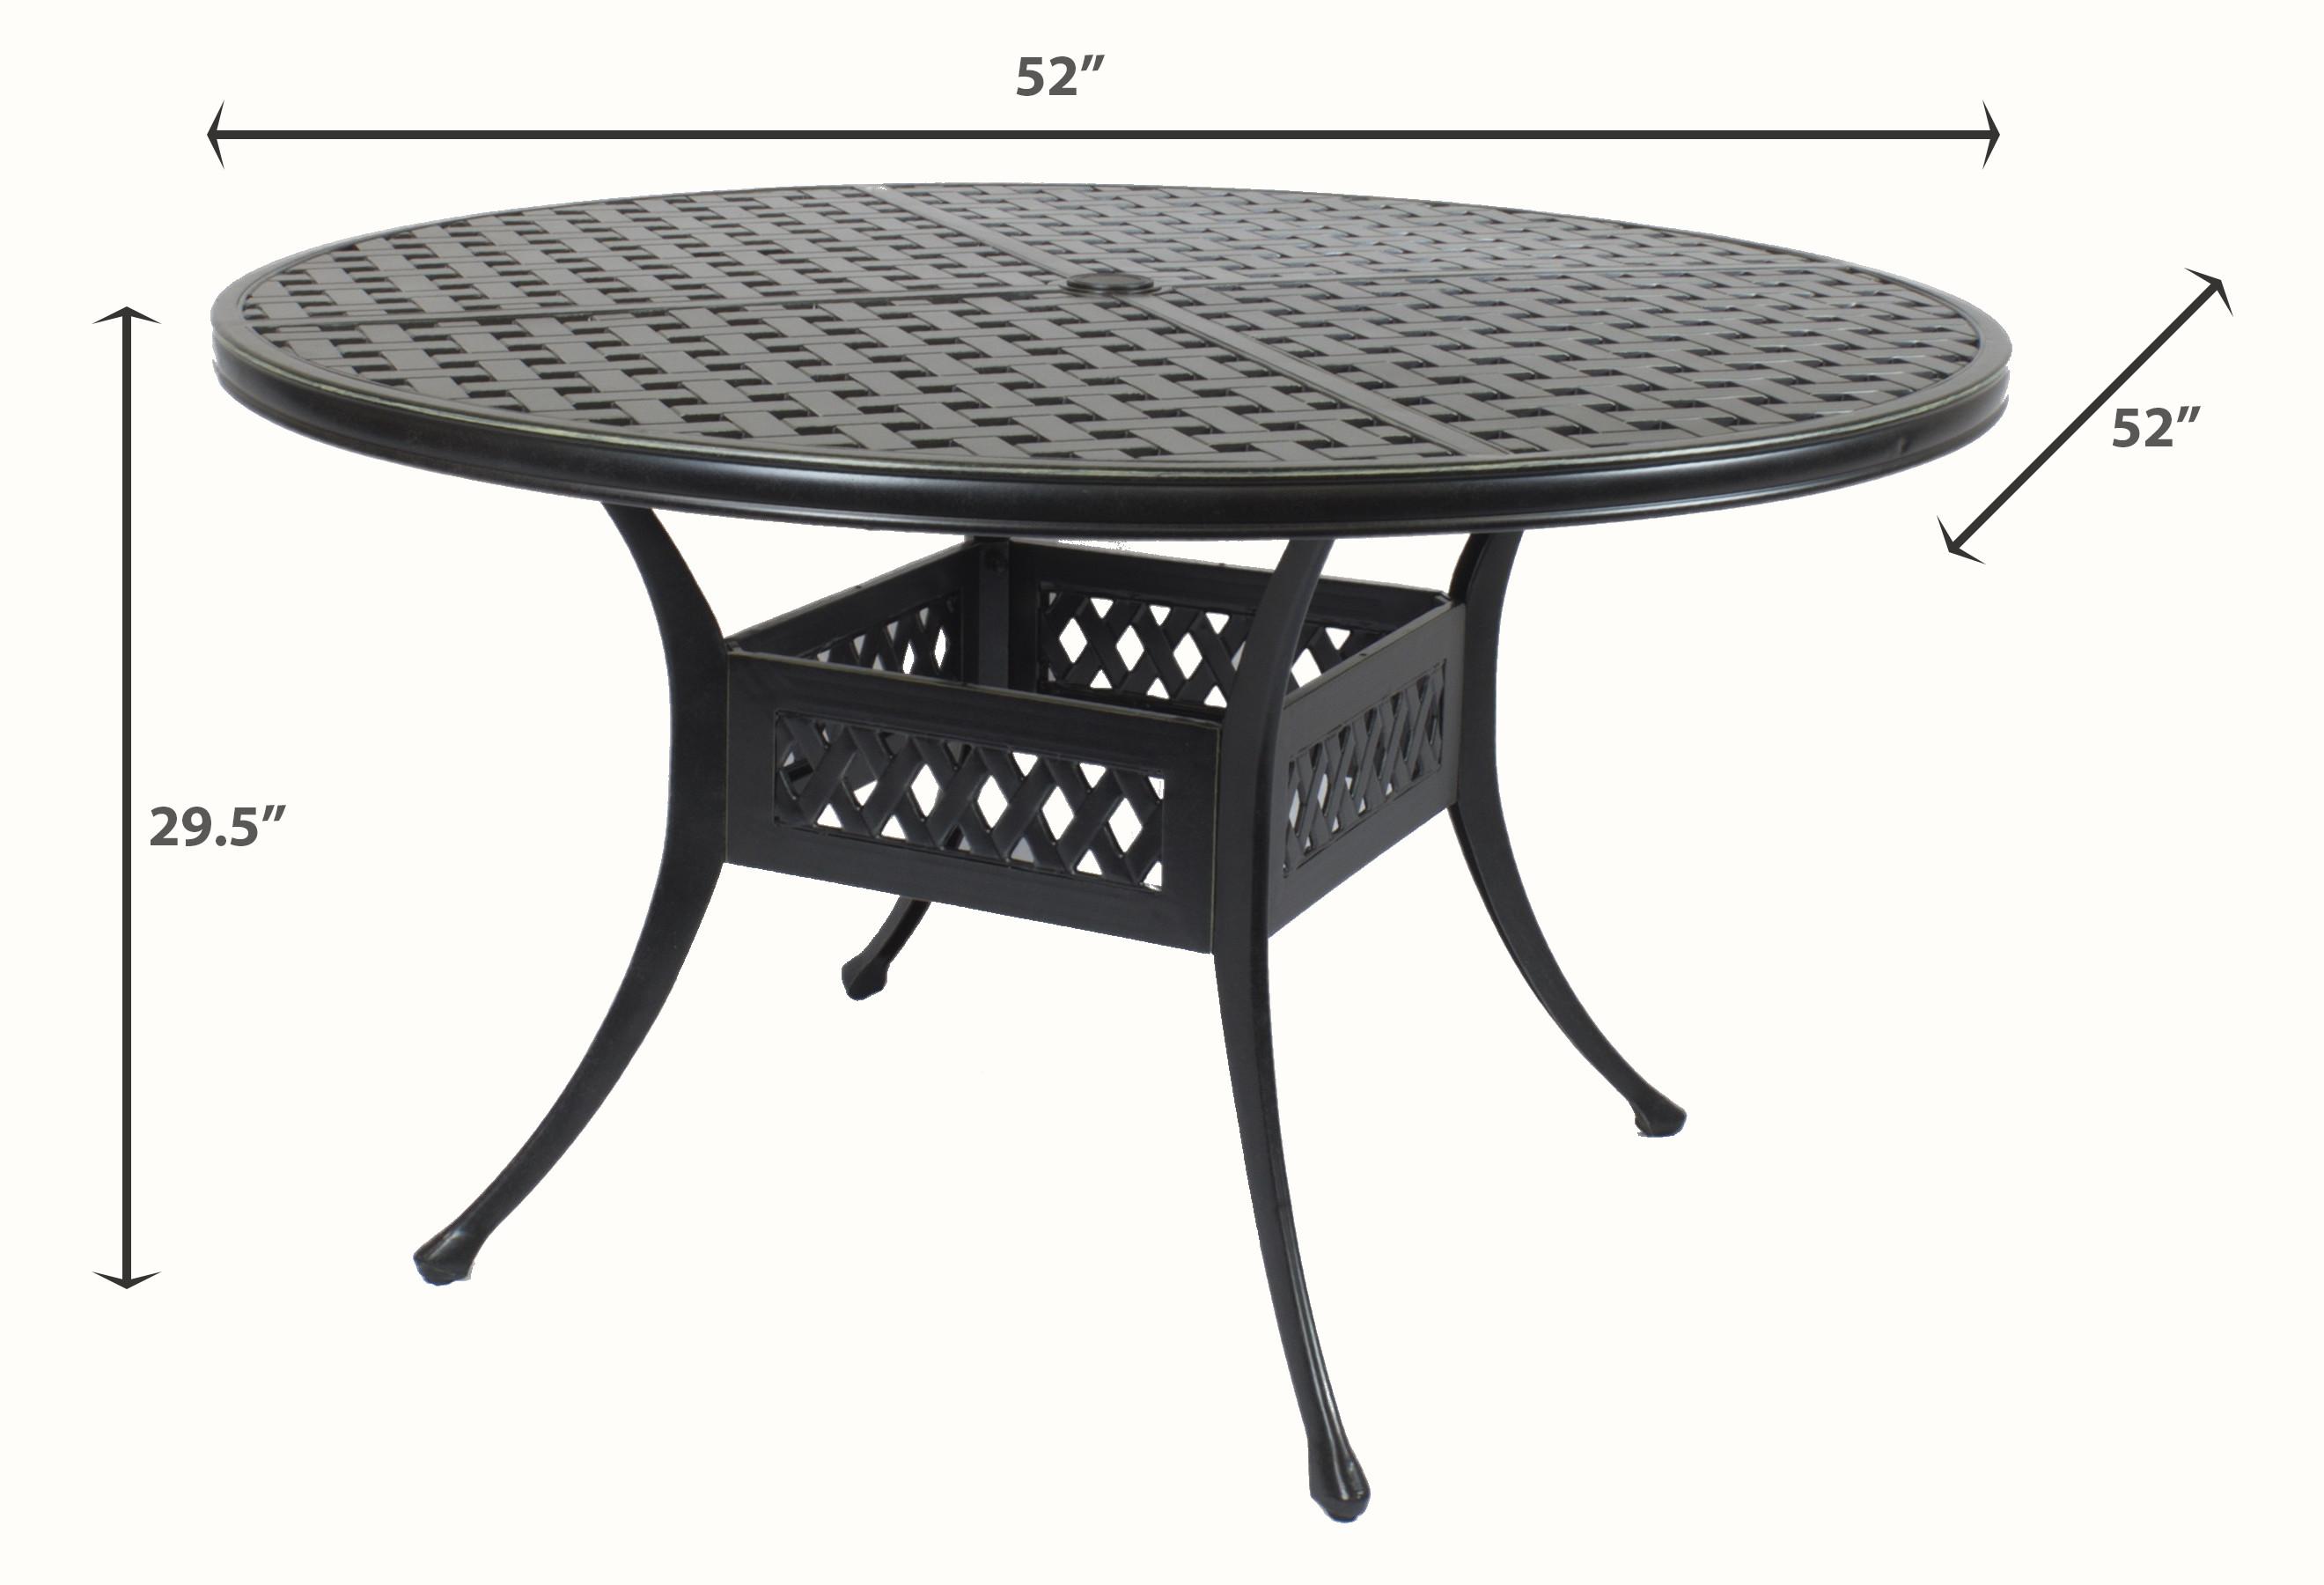 

    
St. Tropez Cast Alumnium Fully Welded 52" Round Dining Table by CaliPatio
